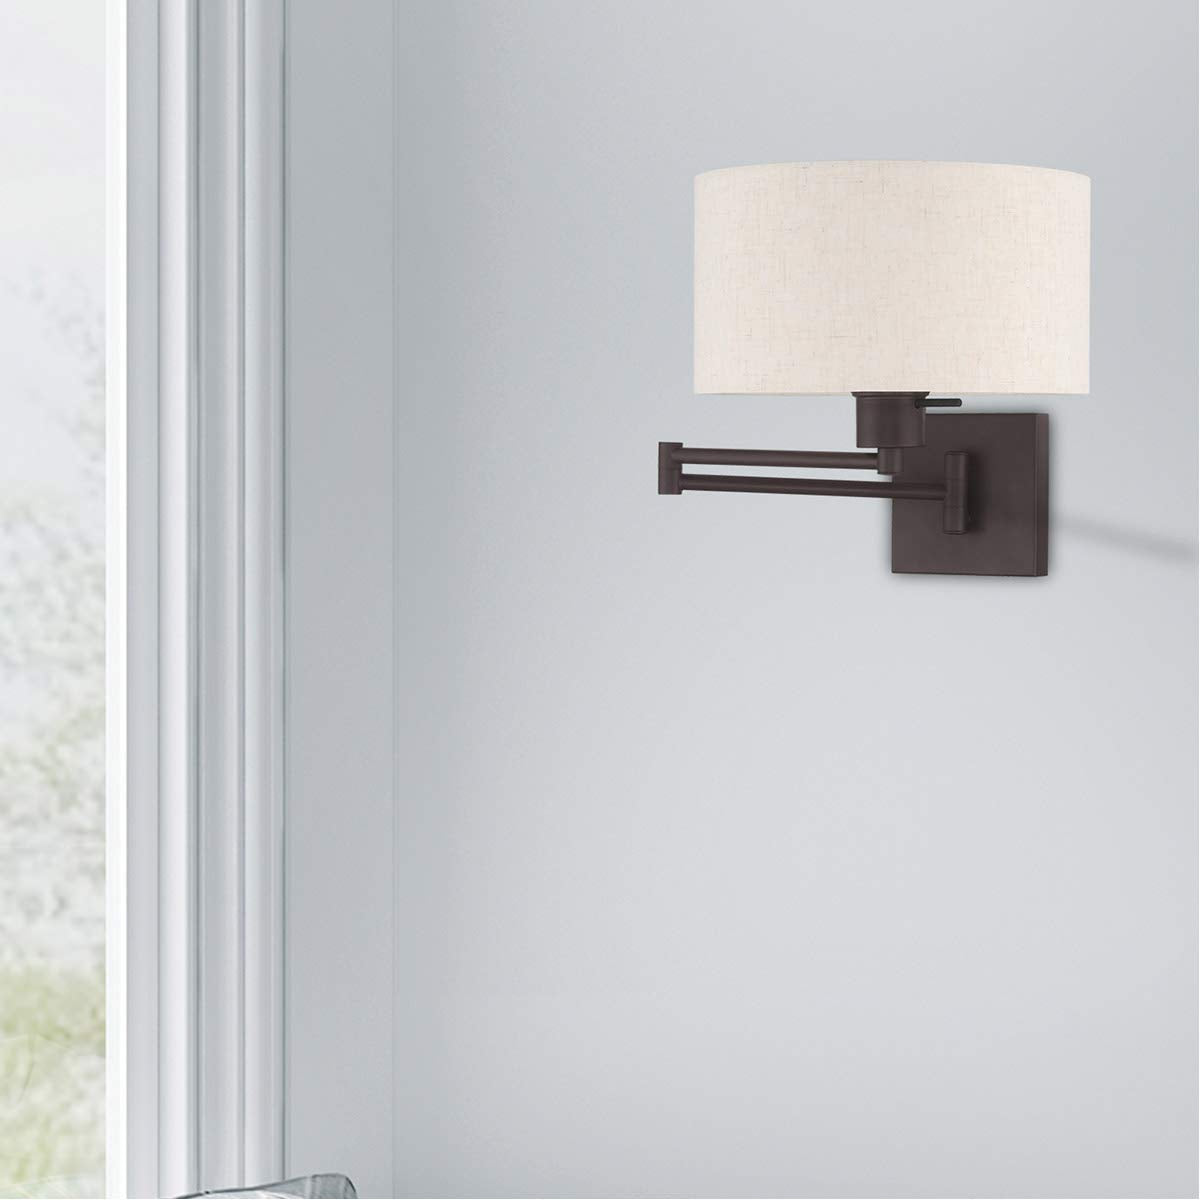 Livex Lighting 40037-07 24.25" One Light Swing Arm Wall Mount, Bronze Finish with Oatmeal Fabric Shade